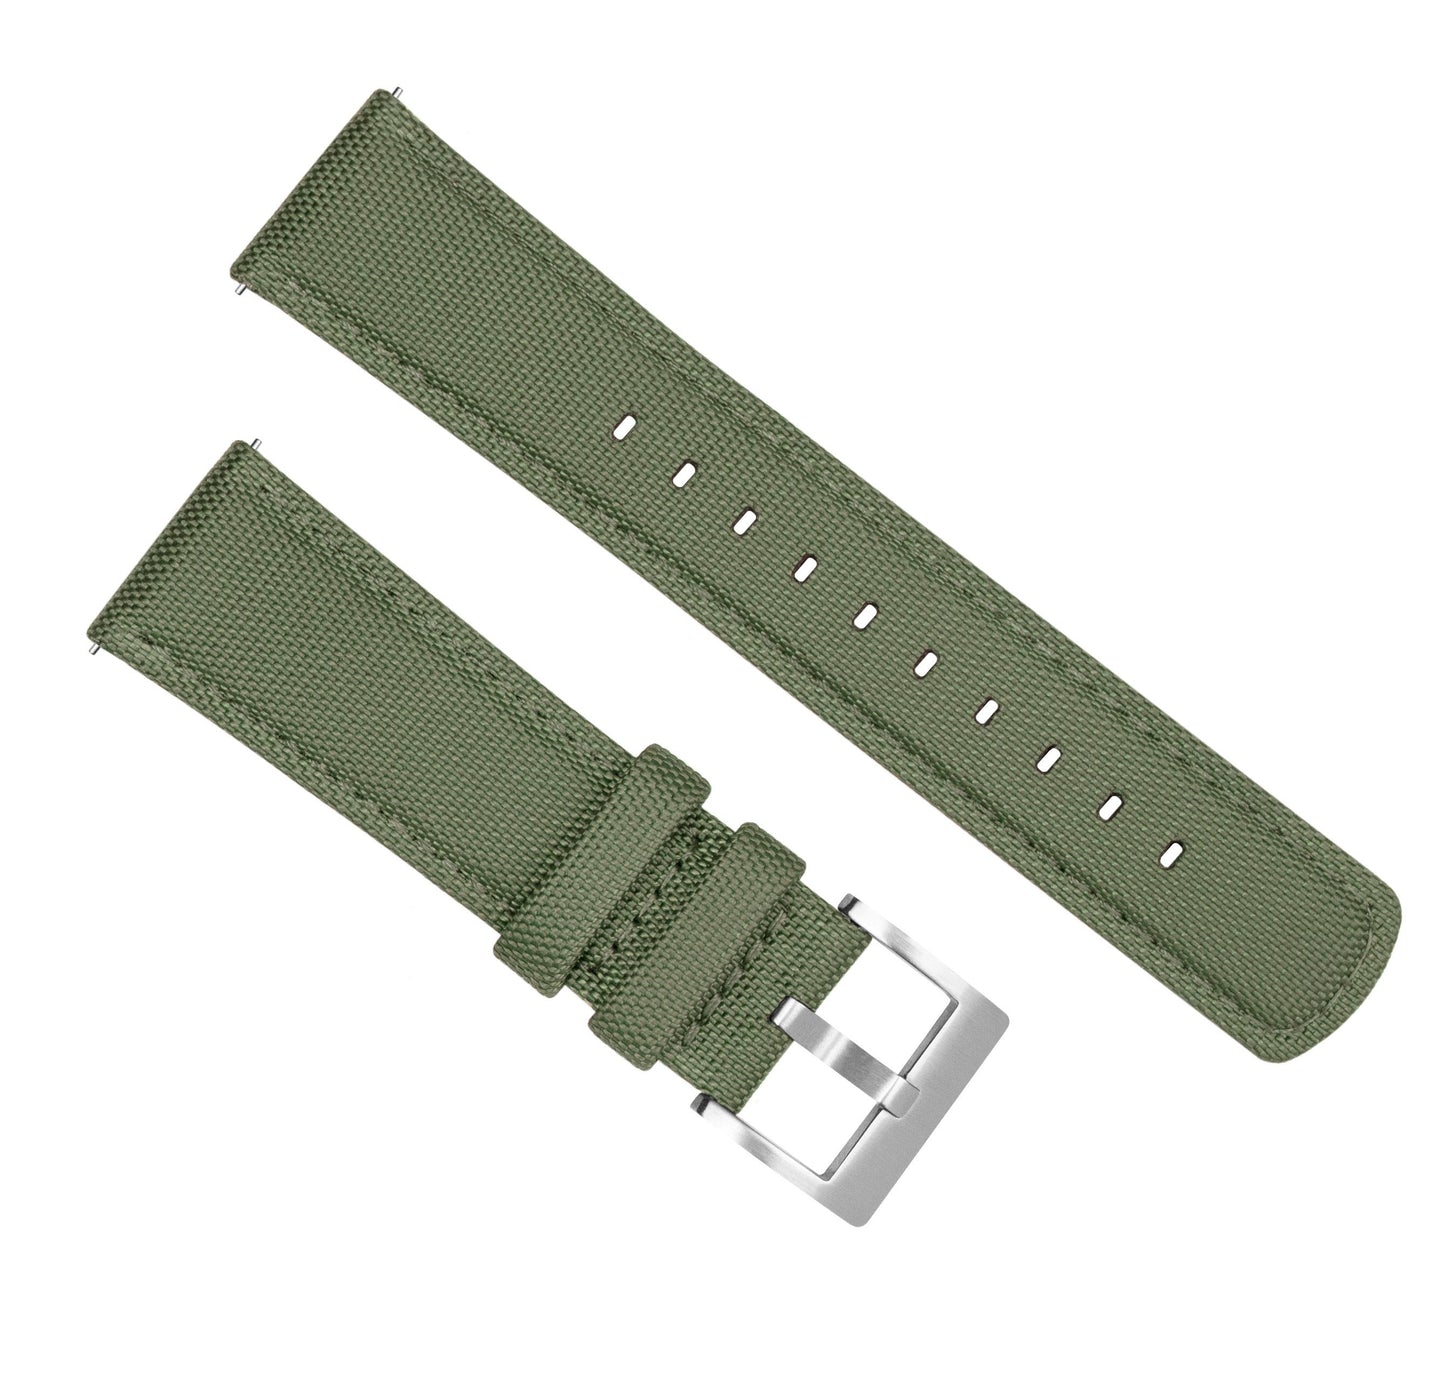 Withings Nokia Activité and Steel HR | Sailcloth Quick Release | Army Green - Barton Watch Bands